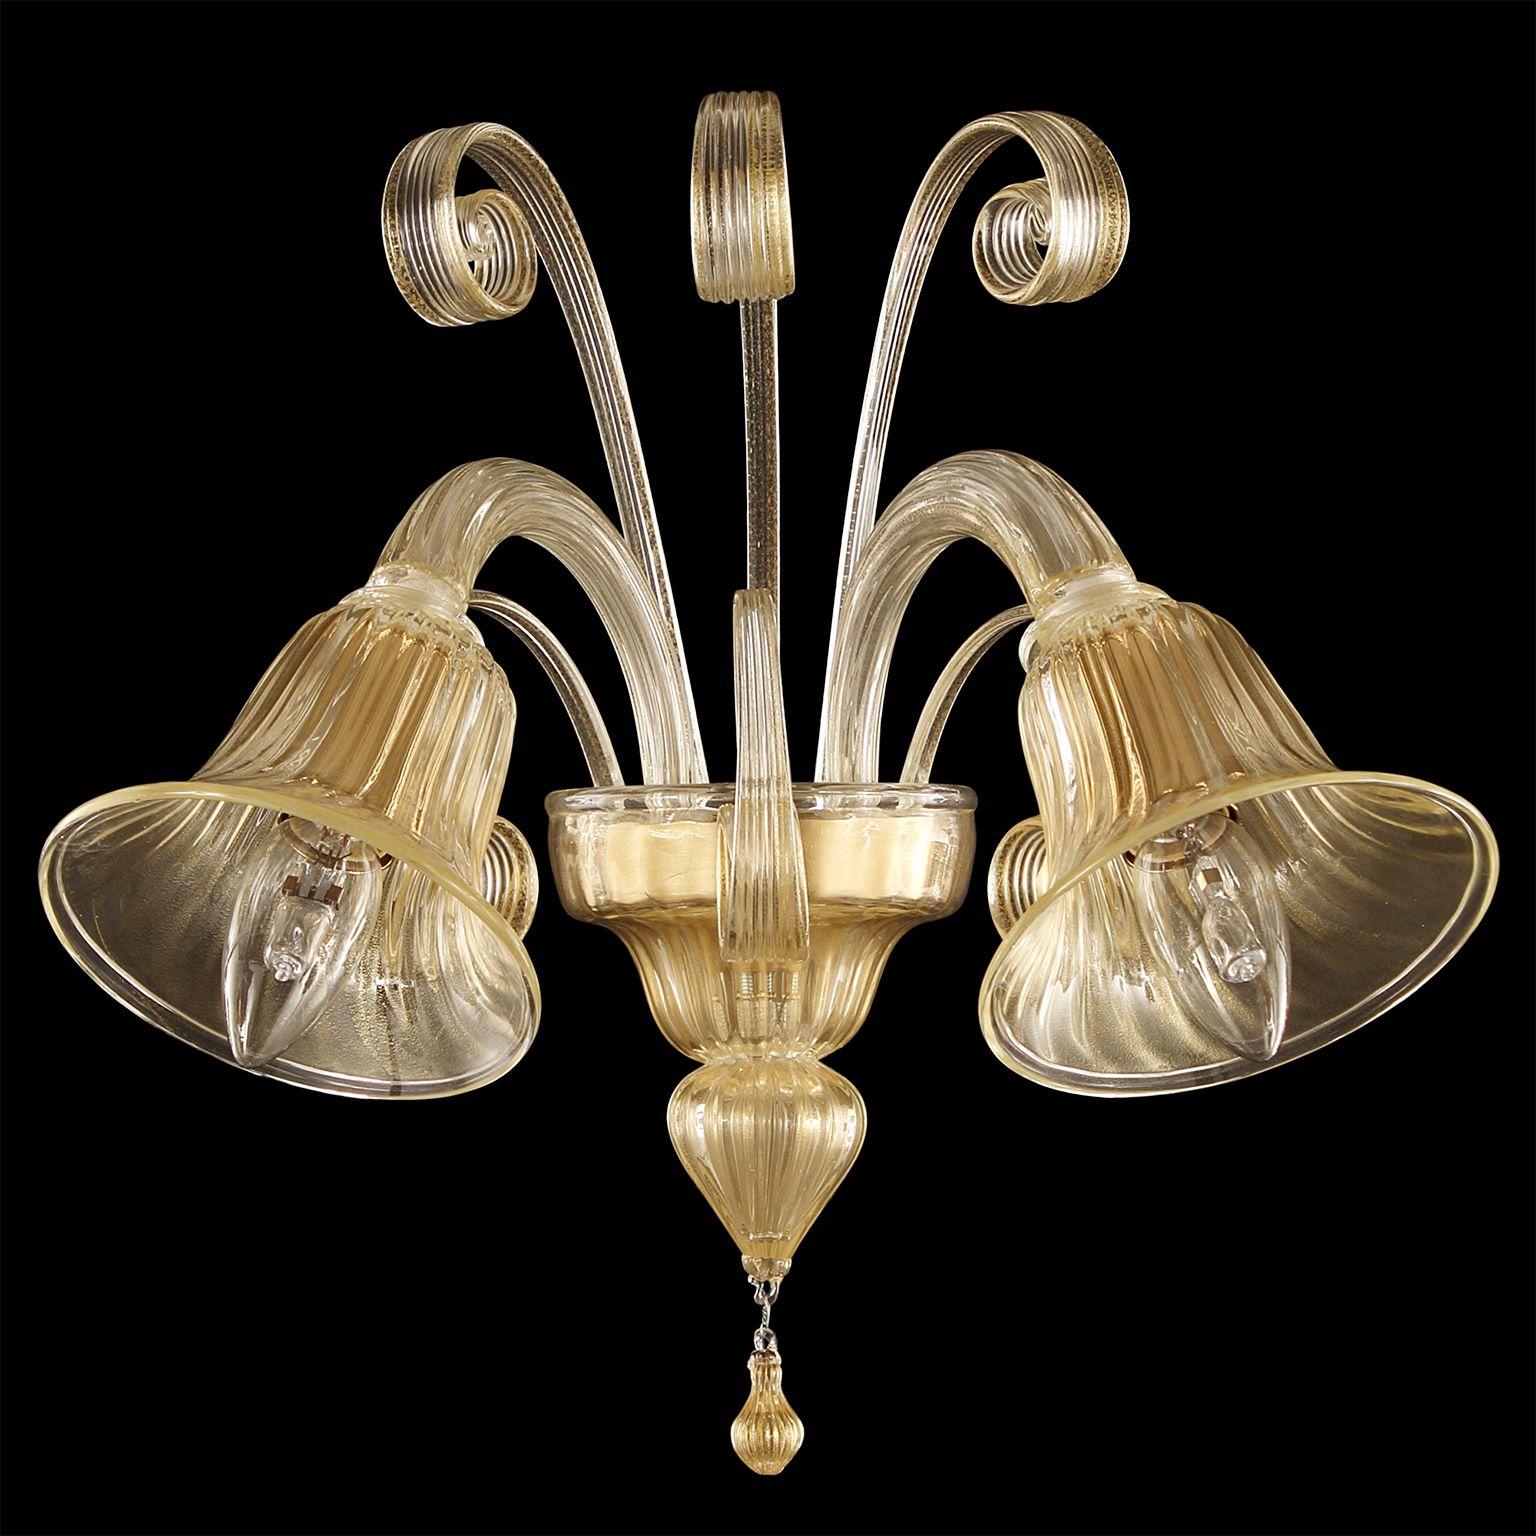 Capriccio by Multiforme is a sconce with 2 downward lights golden leaf artistic glass and curly ornamental elements.
Inspired by the Classic Venetian tradition it is characterized by a central column where many blown glass “pastoral” elements are